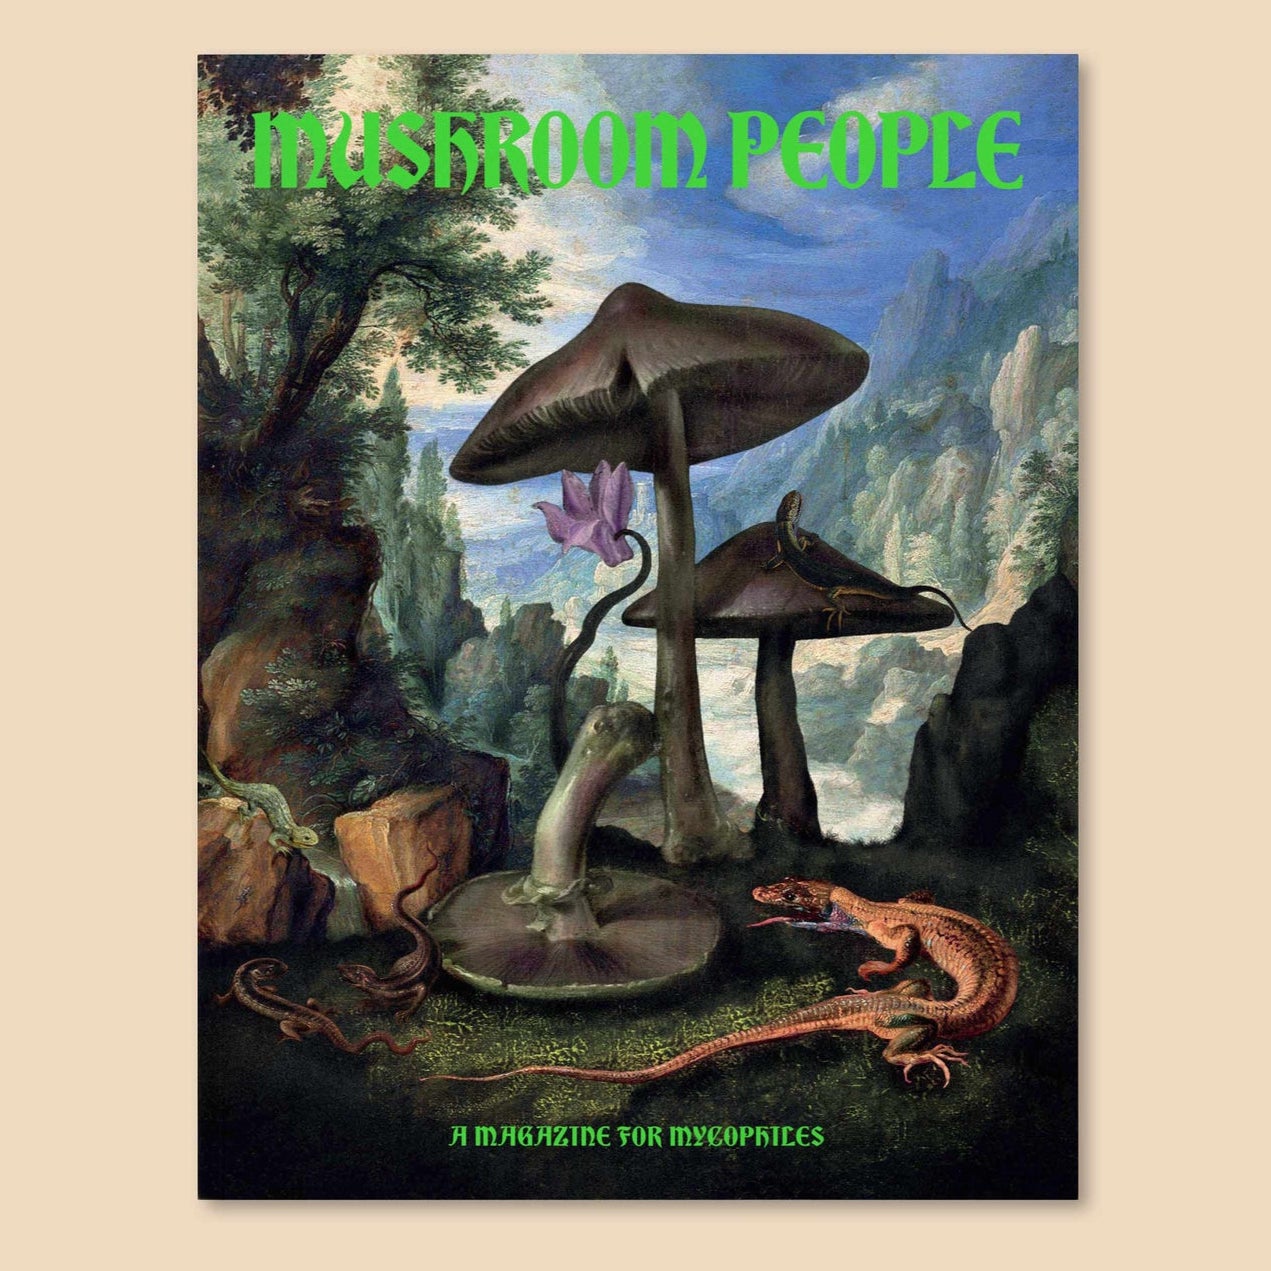 The cover of a magazine titled 'Mushroom people'